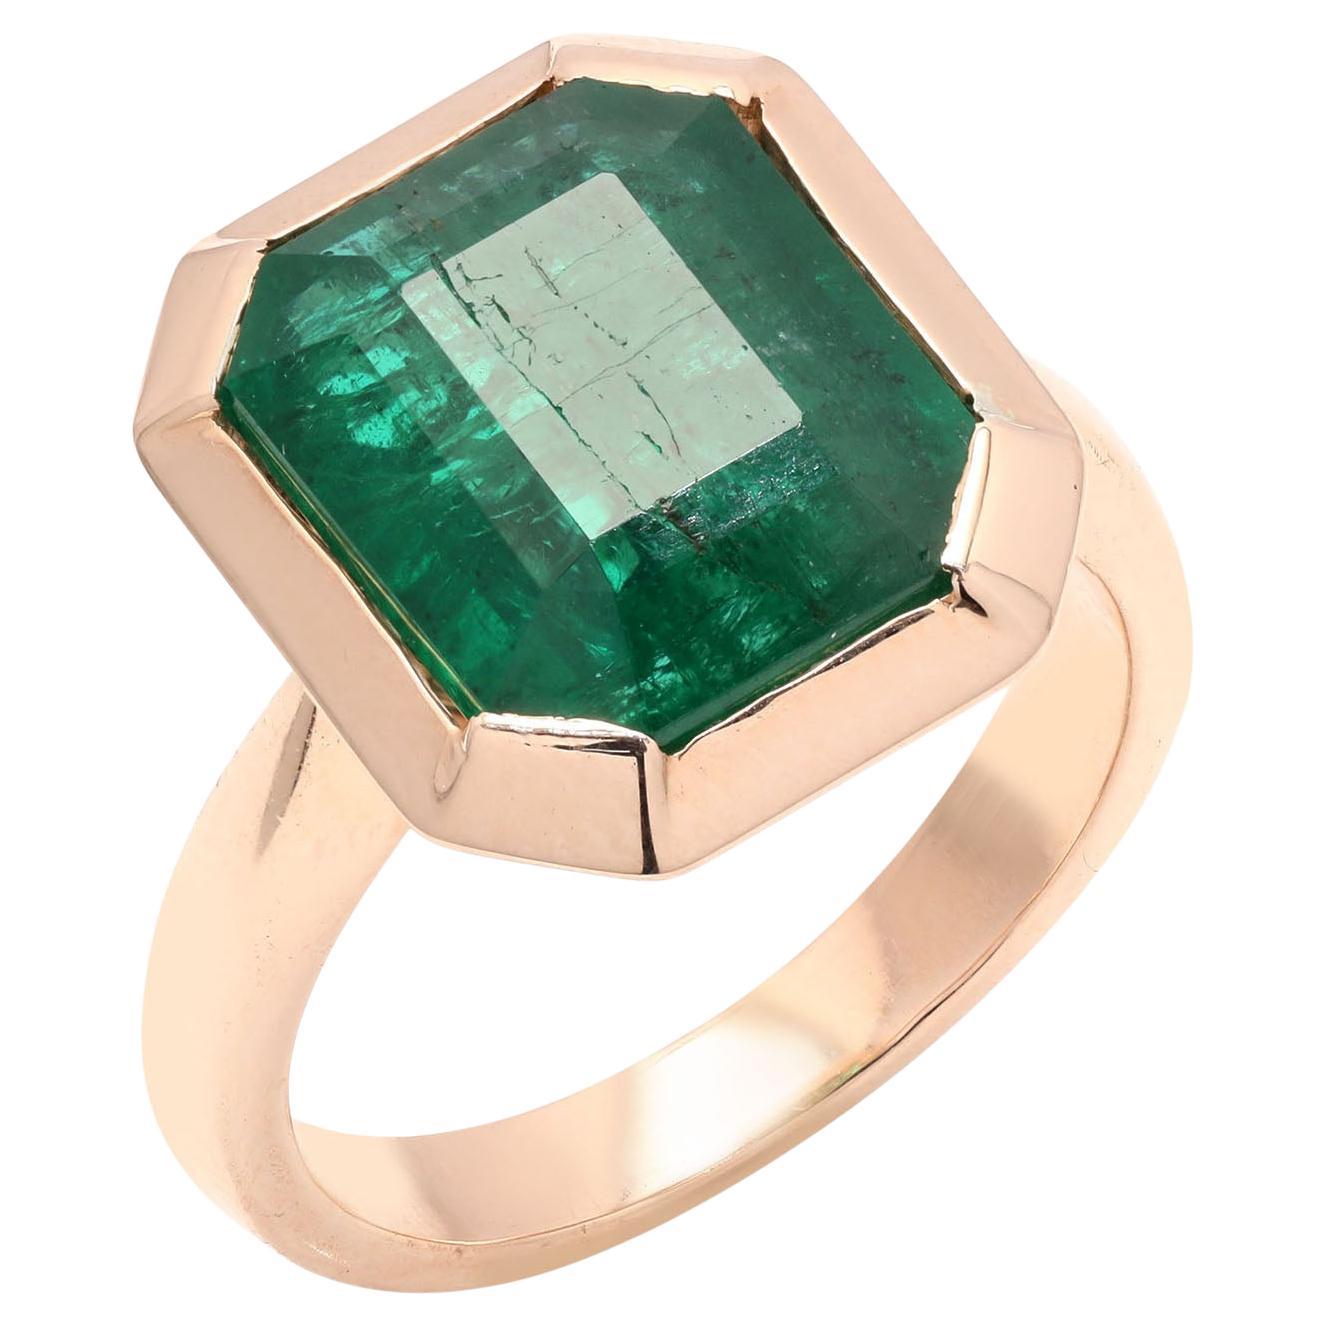 Stunning Zambian Emerald Solitaire Ring Made in 14k Rose Gold For Sale